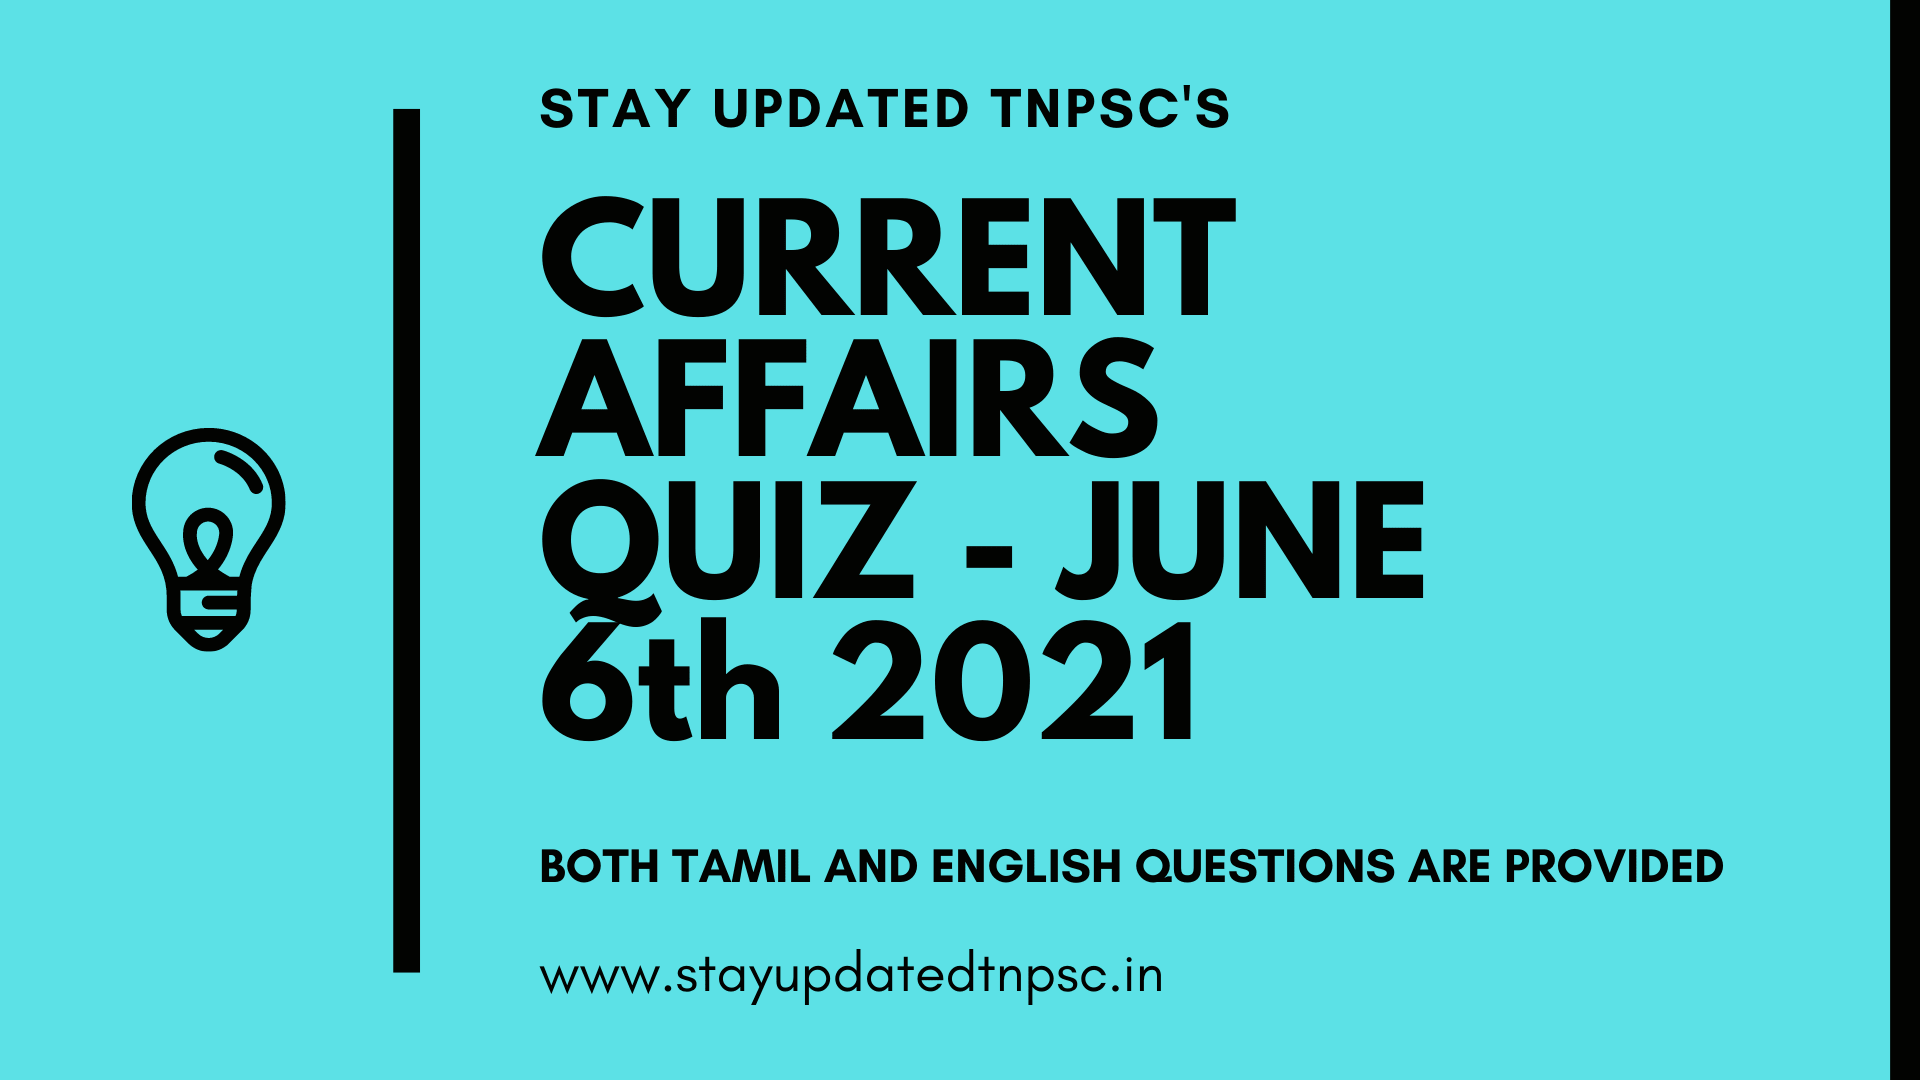 TNPSC DAILY CURRENT AFFAIRS: 06 JUNE 2021